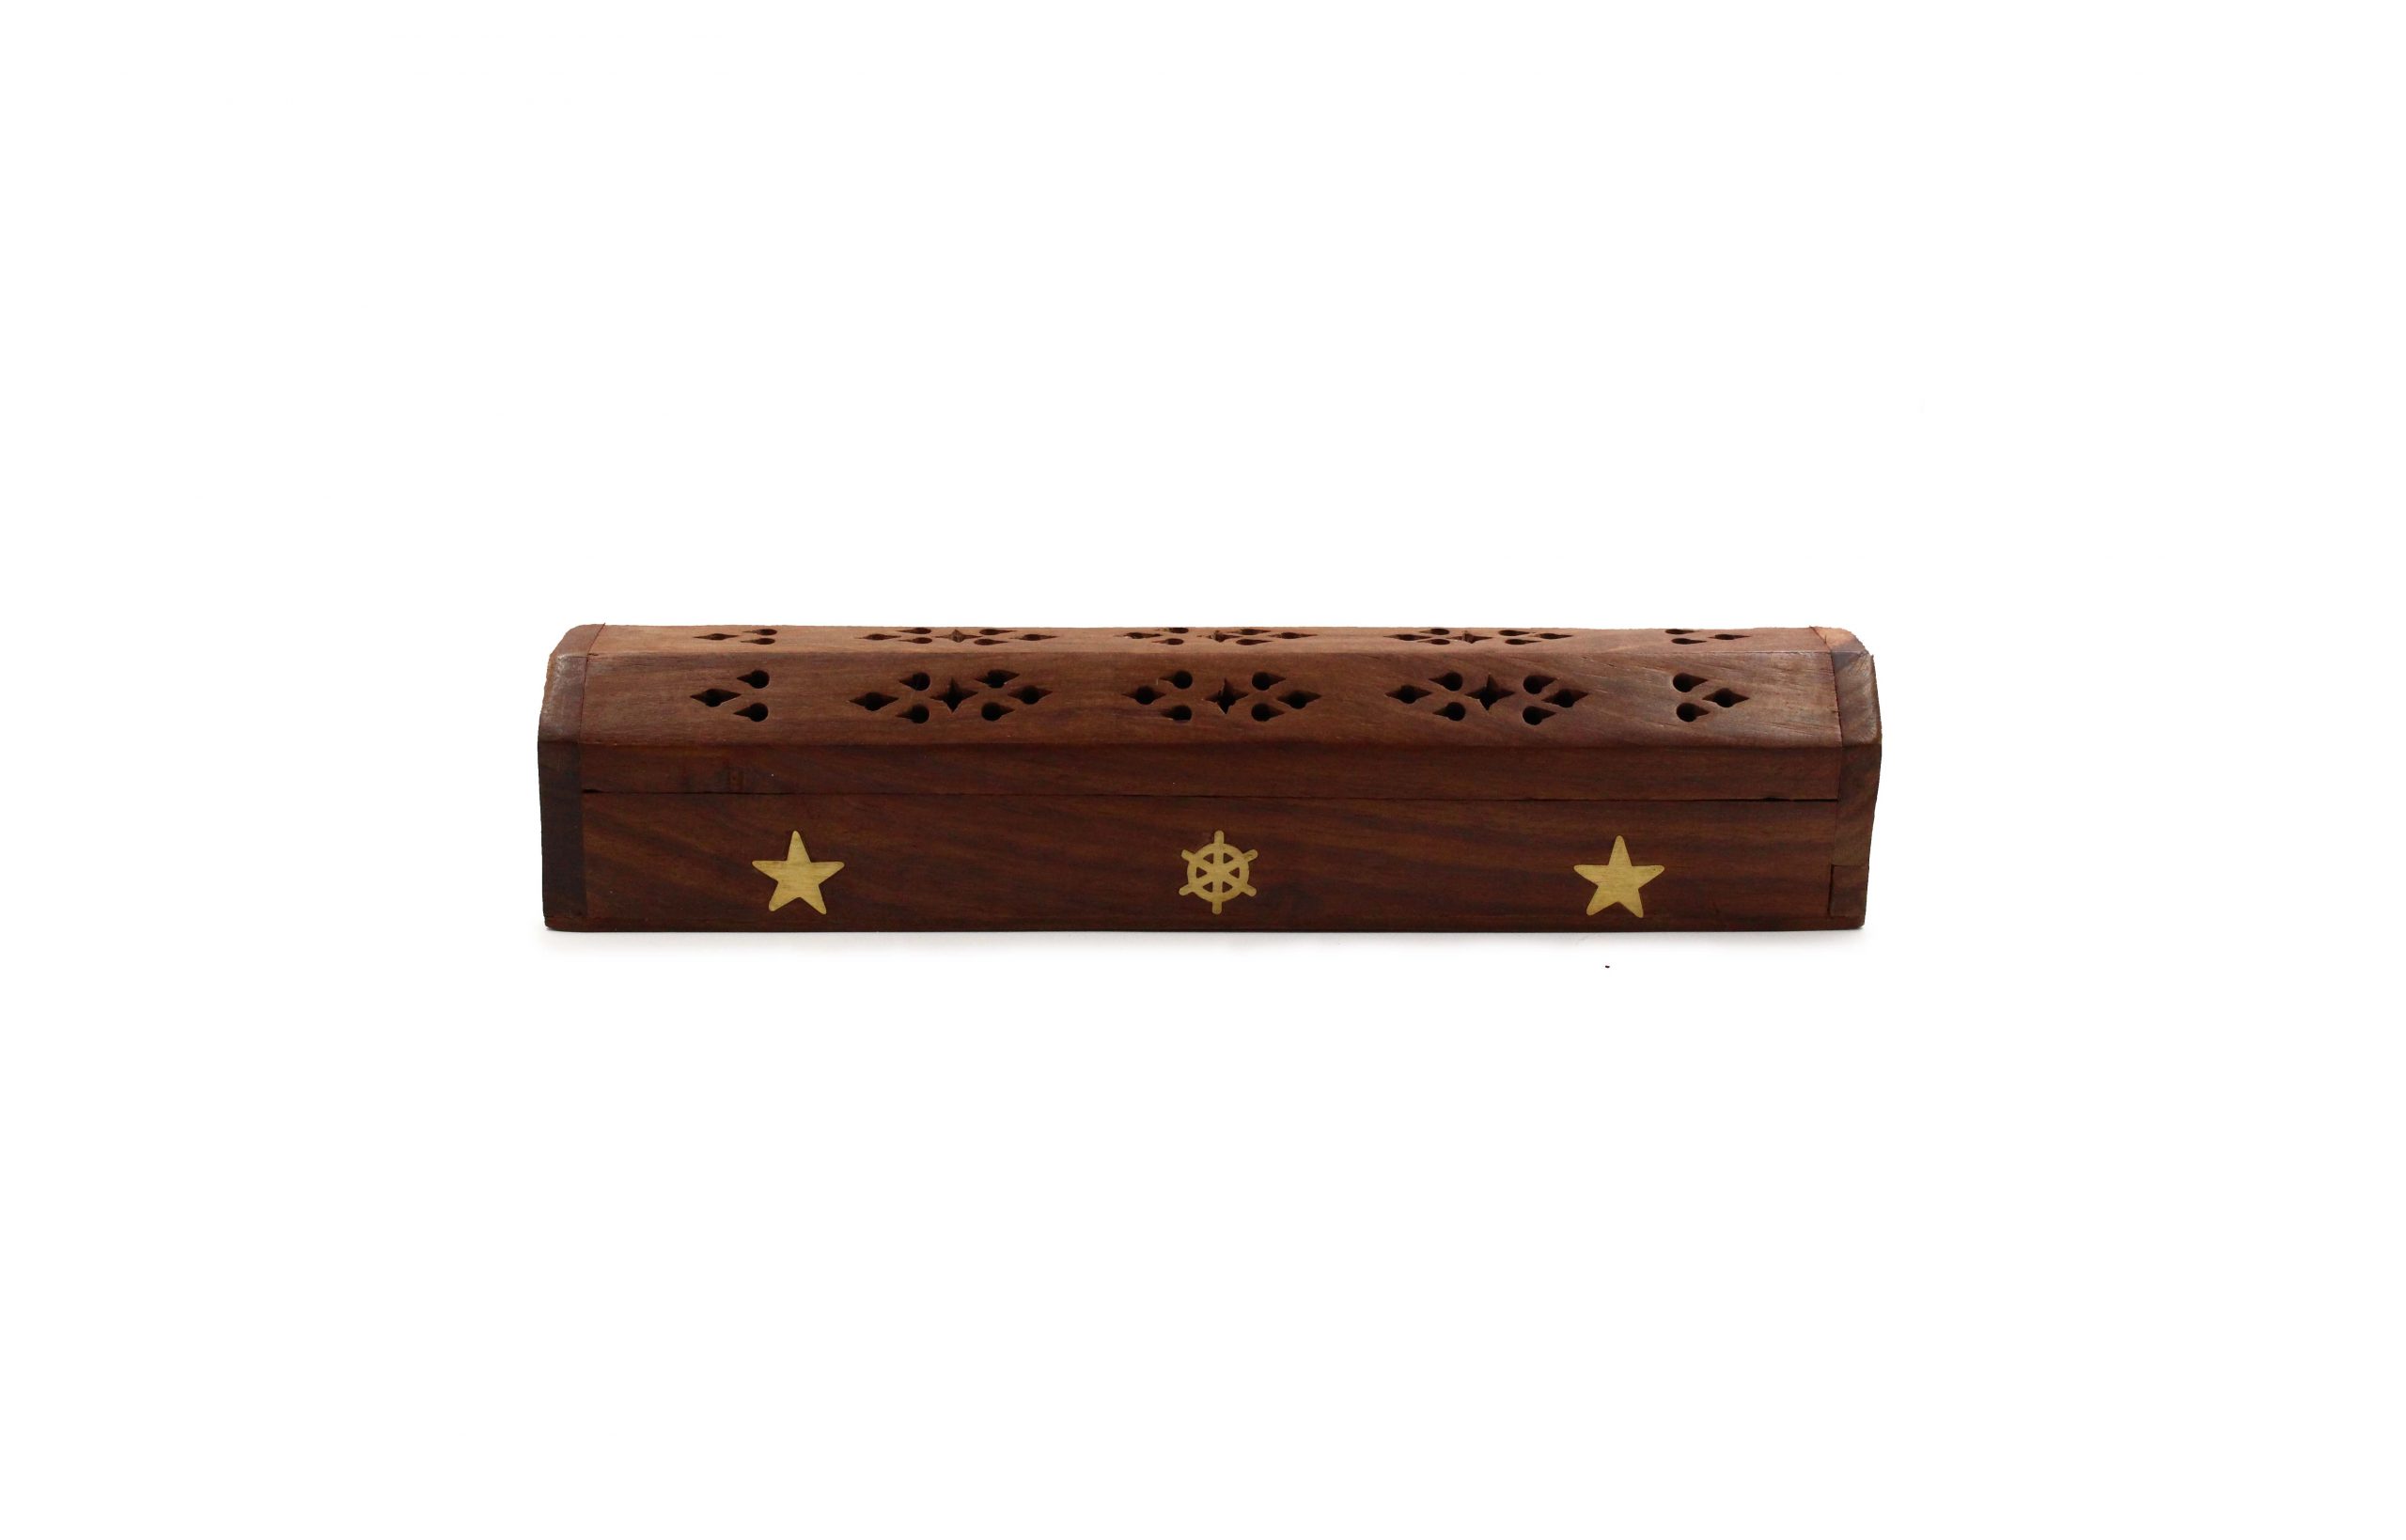 Stars _ Wheel Wood Incense Chest Holder - Crystal Dreams